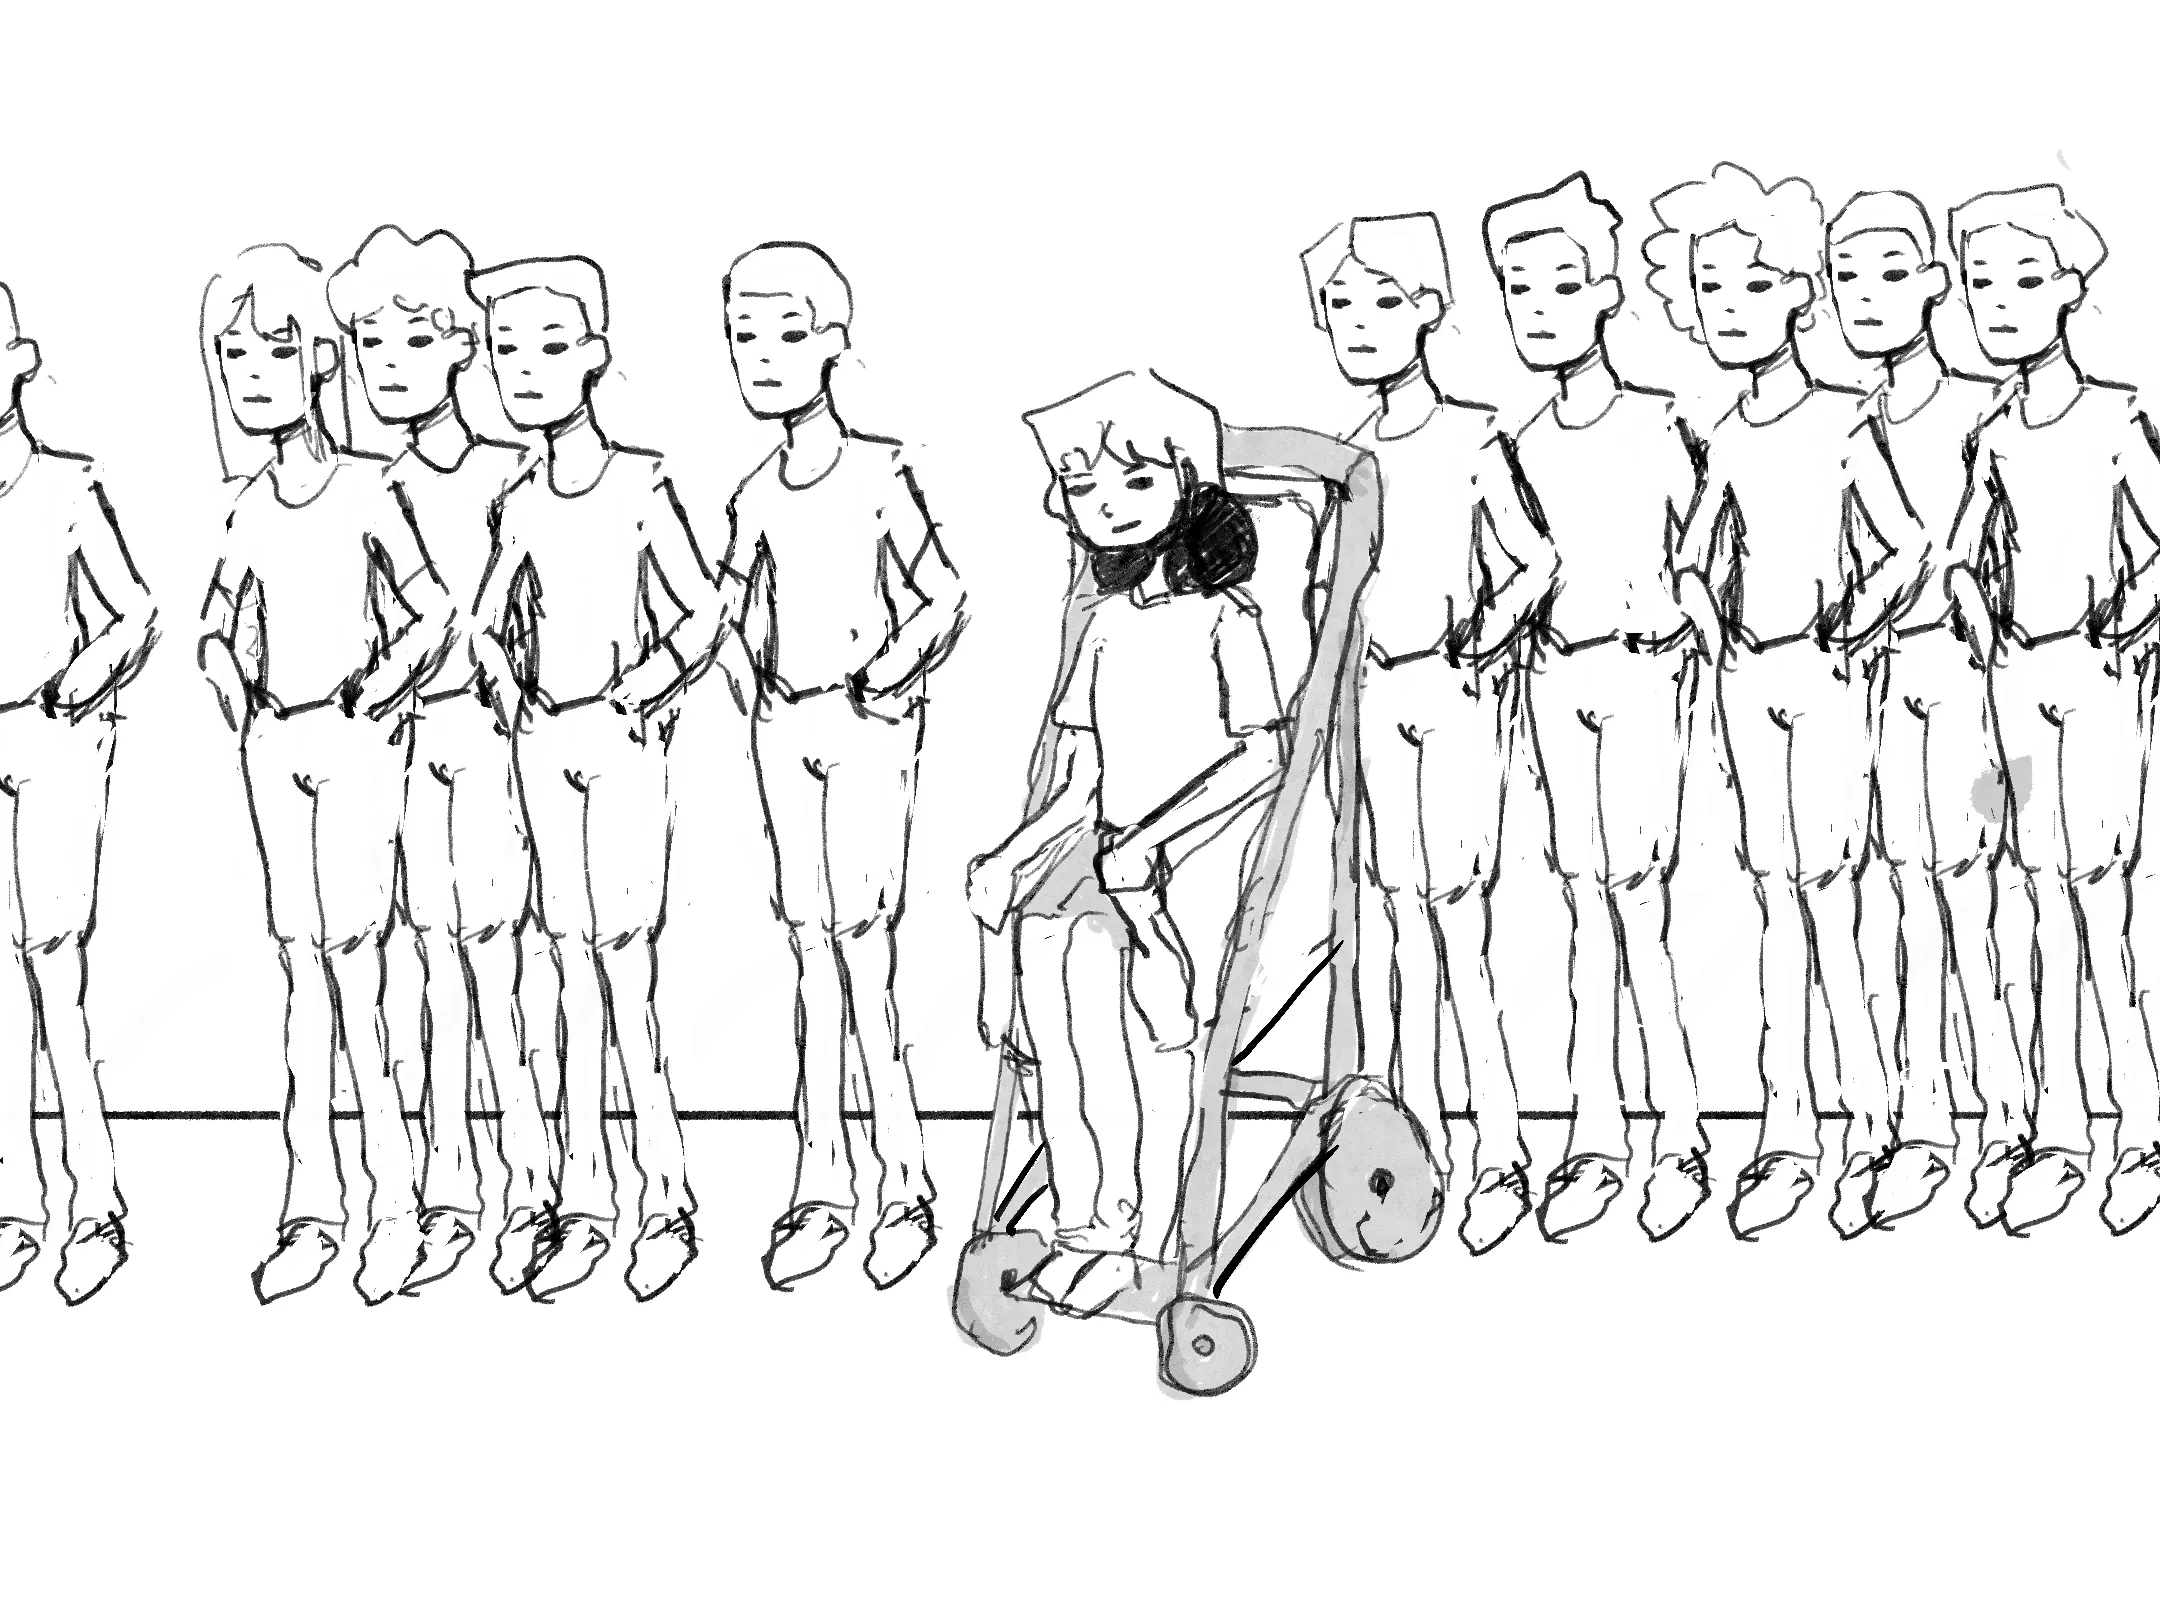 A drawing with many ablebodied people in a line, with one disabled person in the middle.